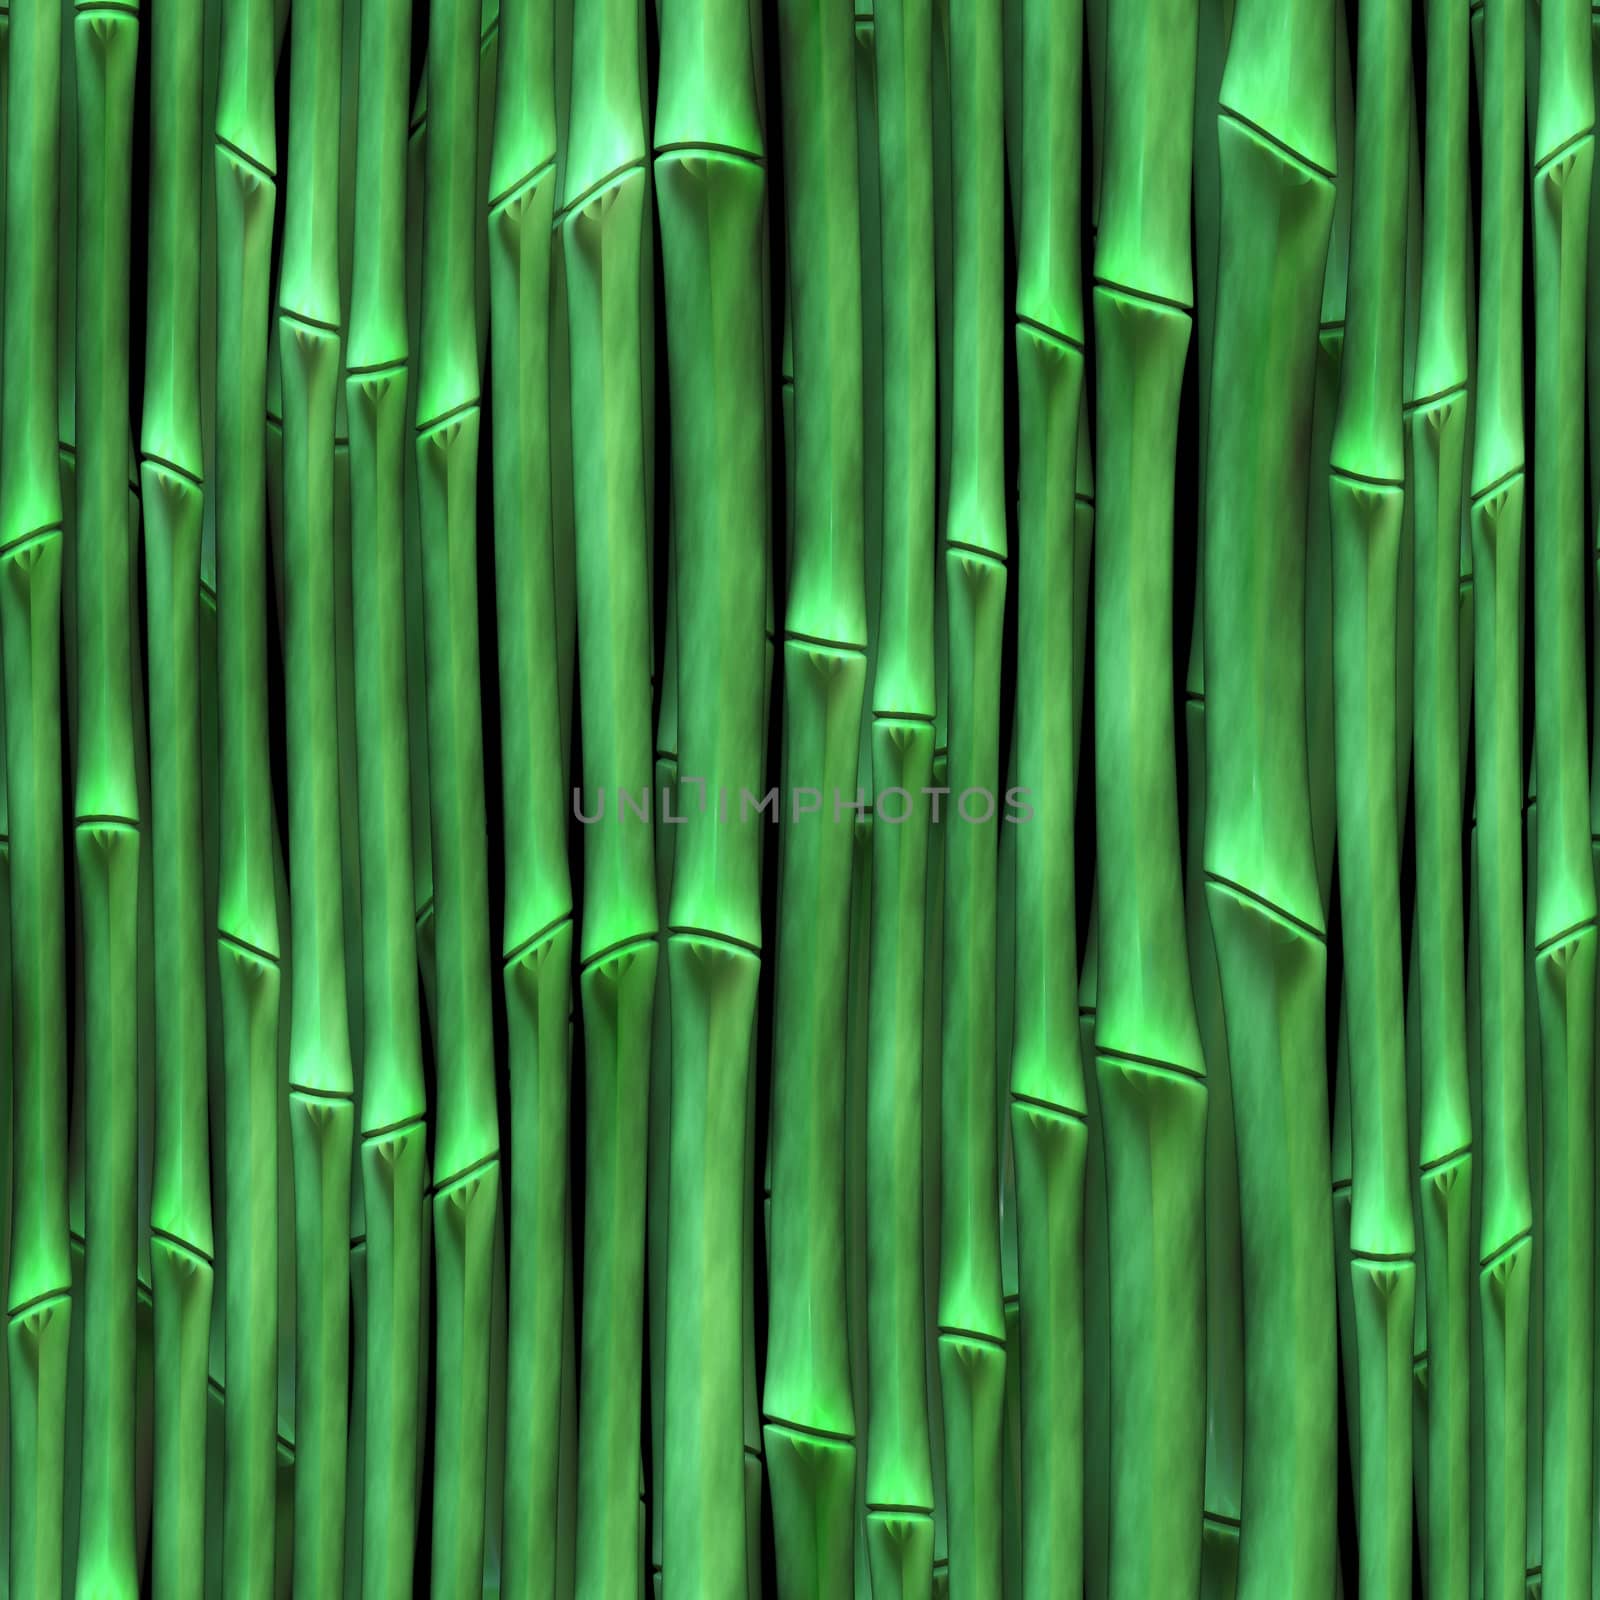 green, smooth bamboo background, tiles seamlessly